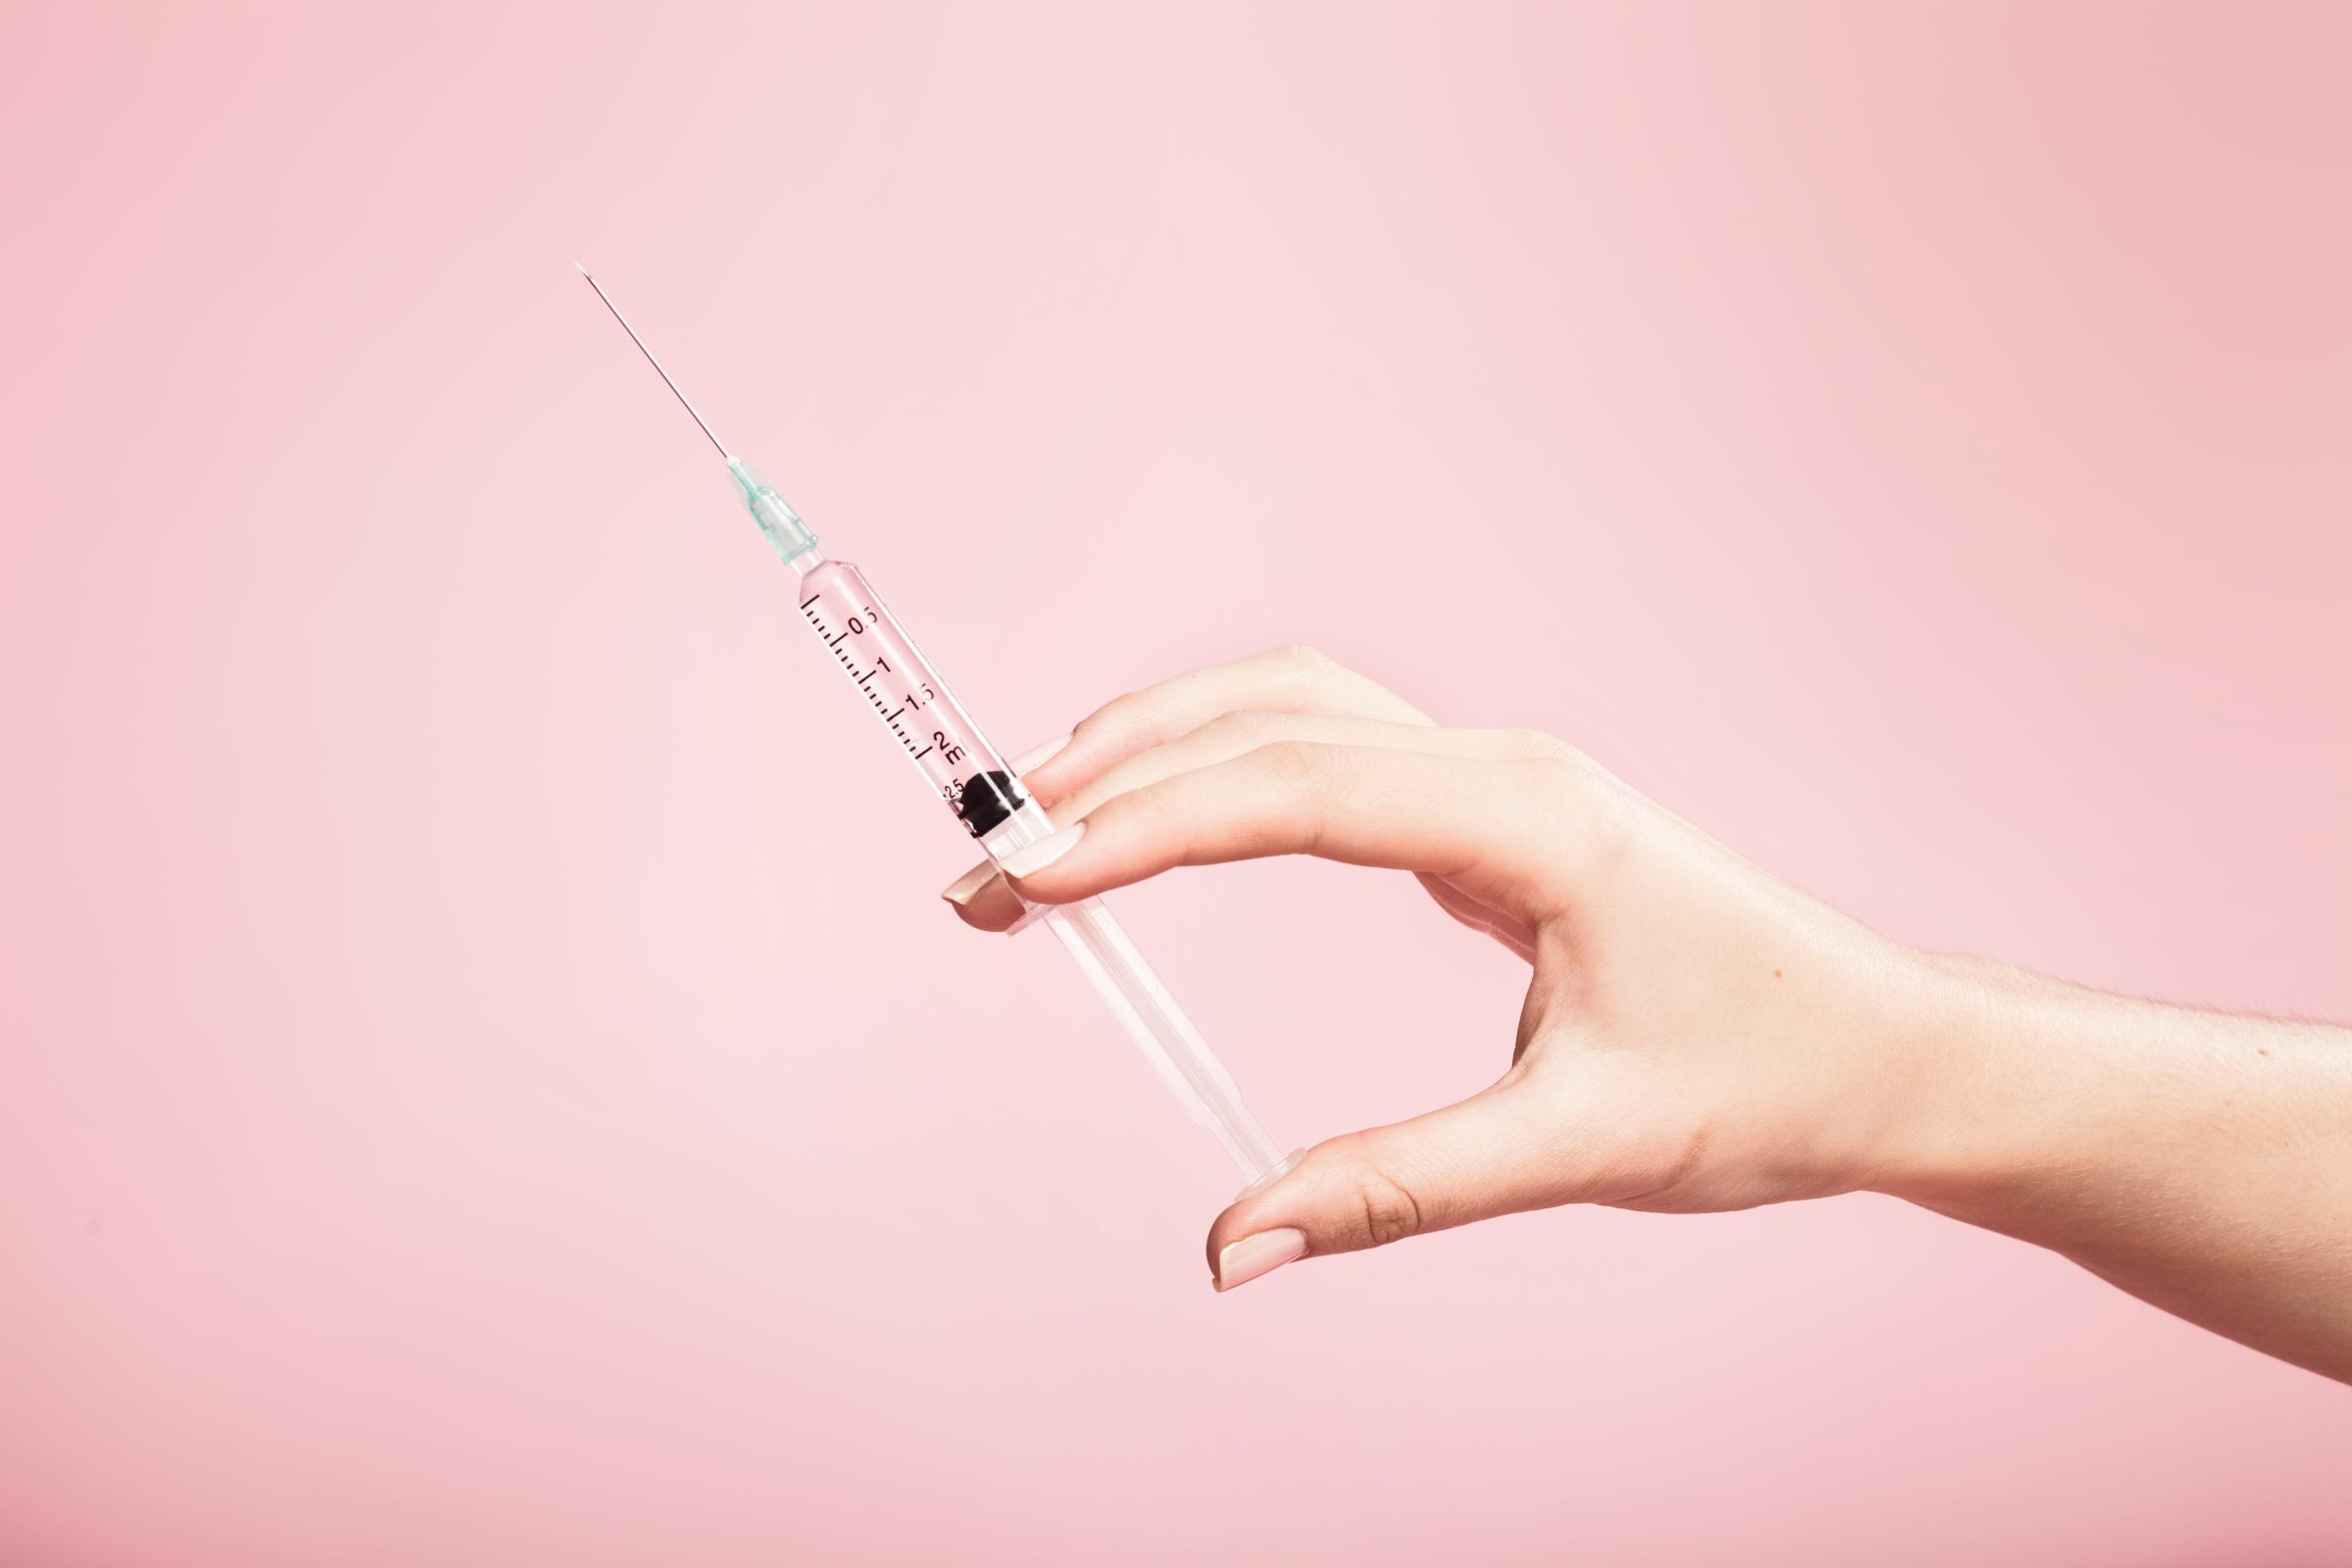 Hand holding syringe in plain pink background TIME health stock